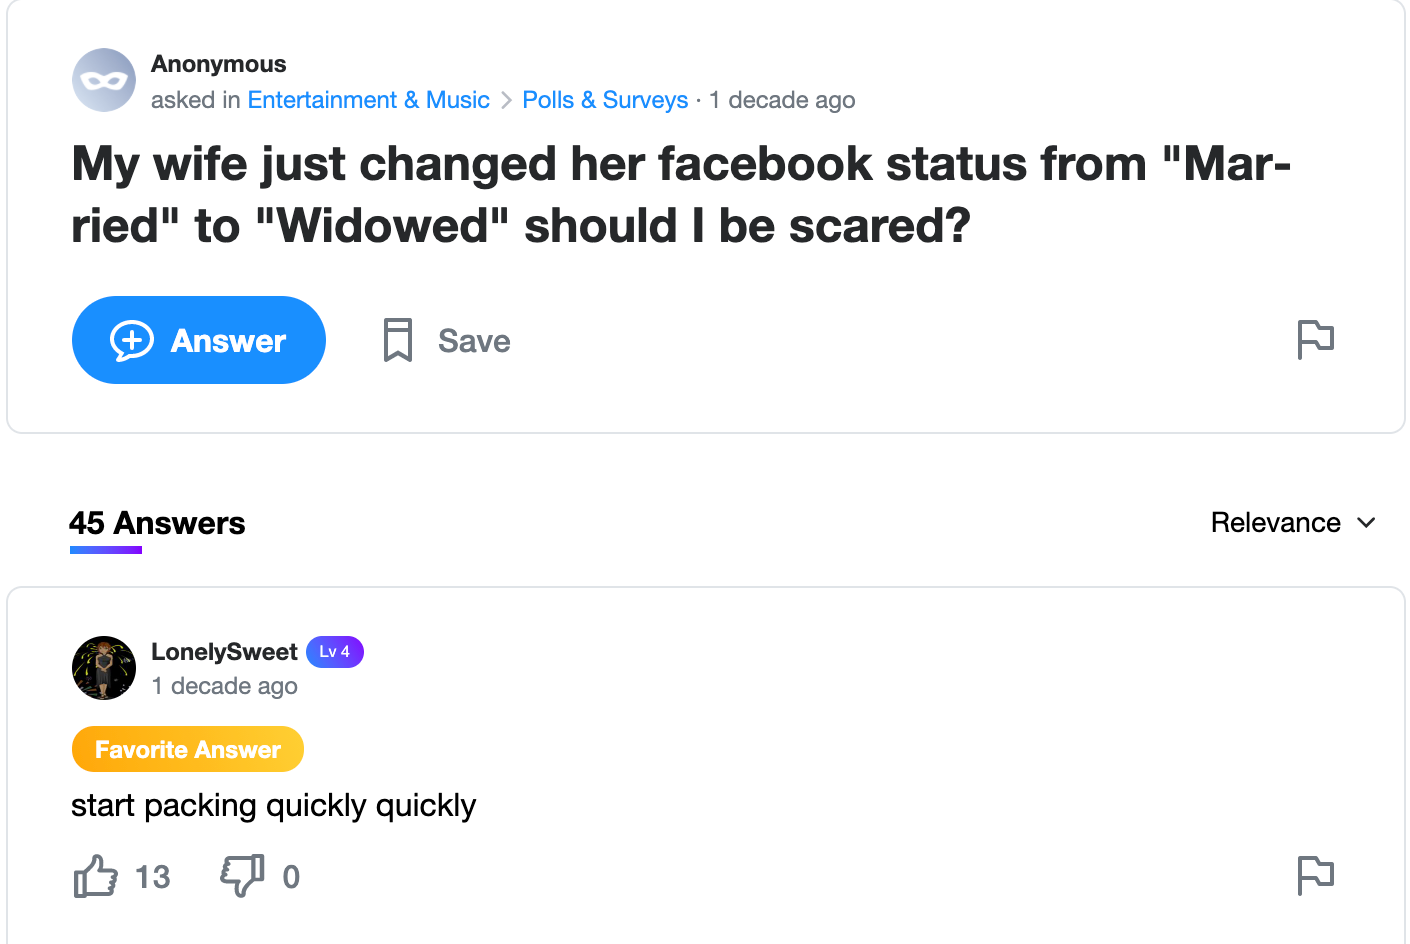 Screengrab of a Yahoo! user asking “My wife just changed her facebook status from ‘Married’ to Widowed’, should I be scared?” The favorite answer says, “start packing quickly”.